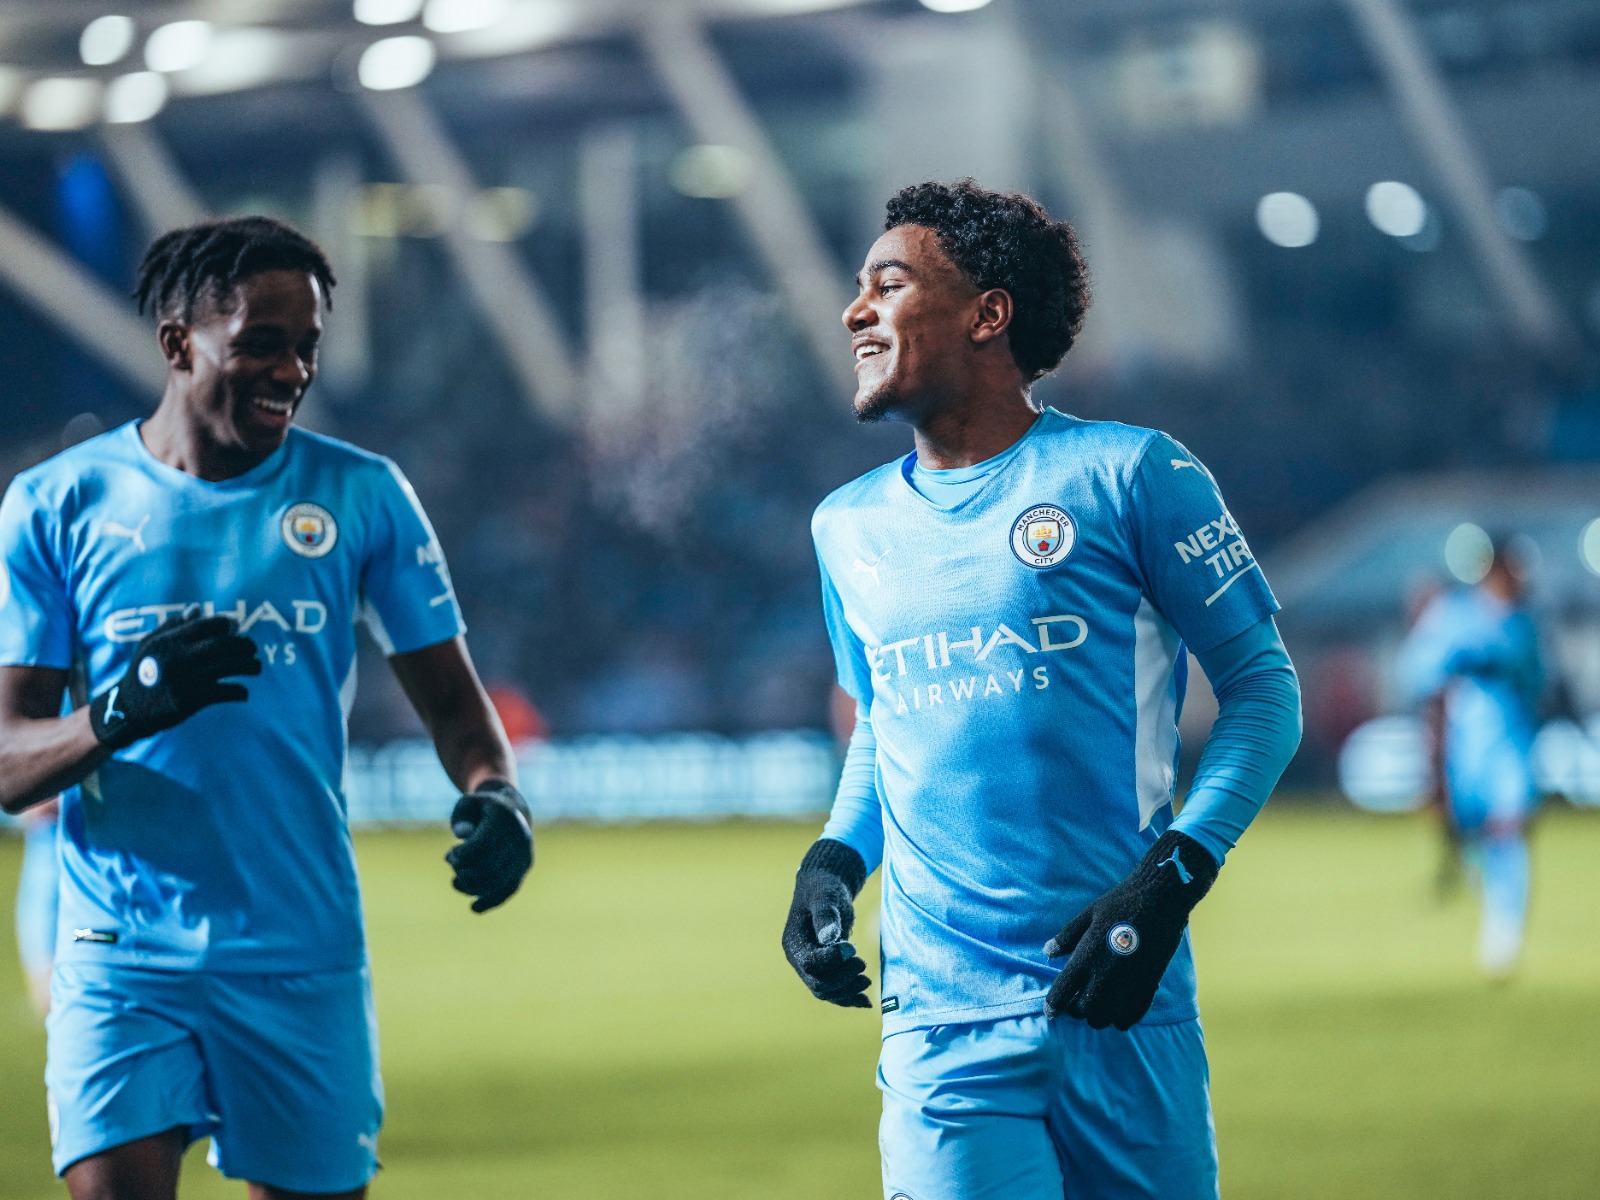 ALL SMILES: City celebrate after our second goal